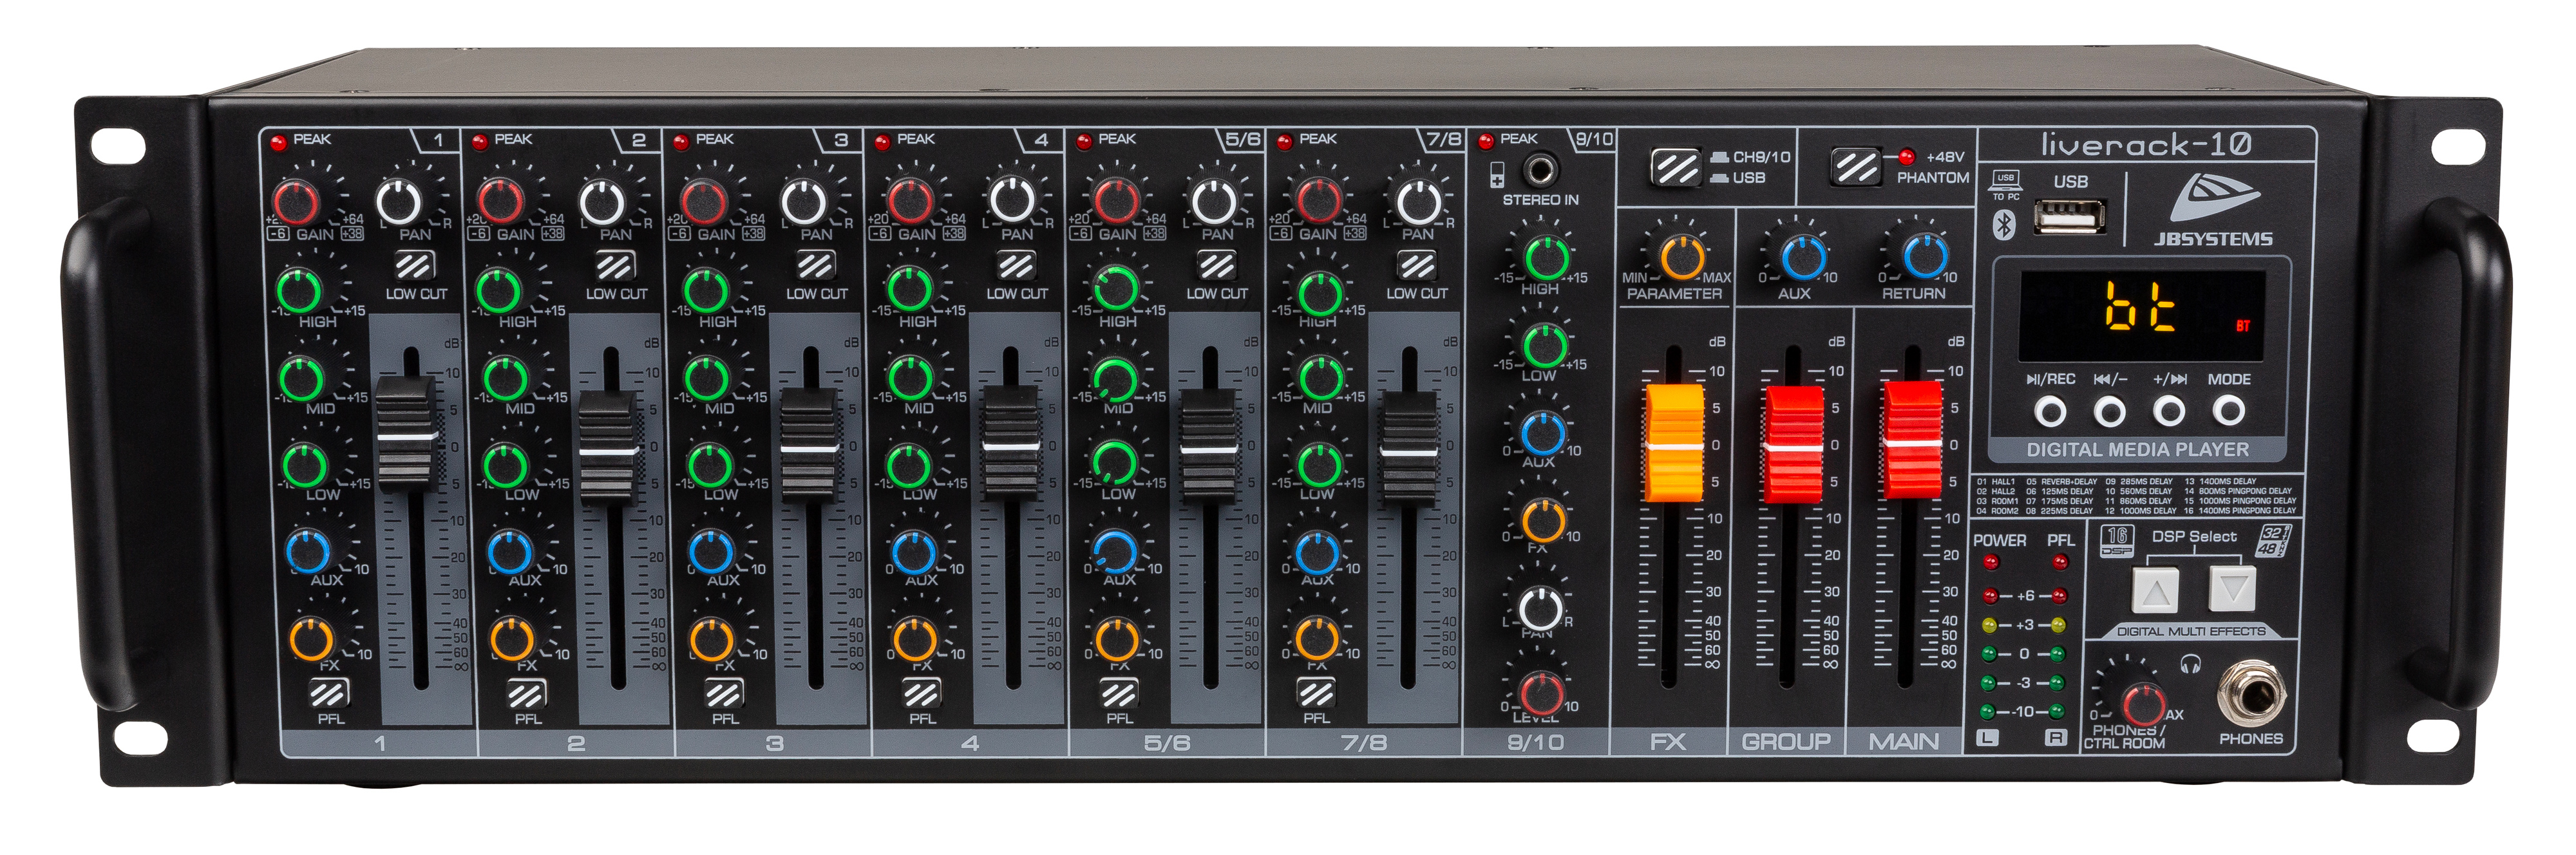 Multi-purpose PA mixer in a handy 19 Rack format, 10 inputs / 7 channels